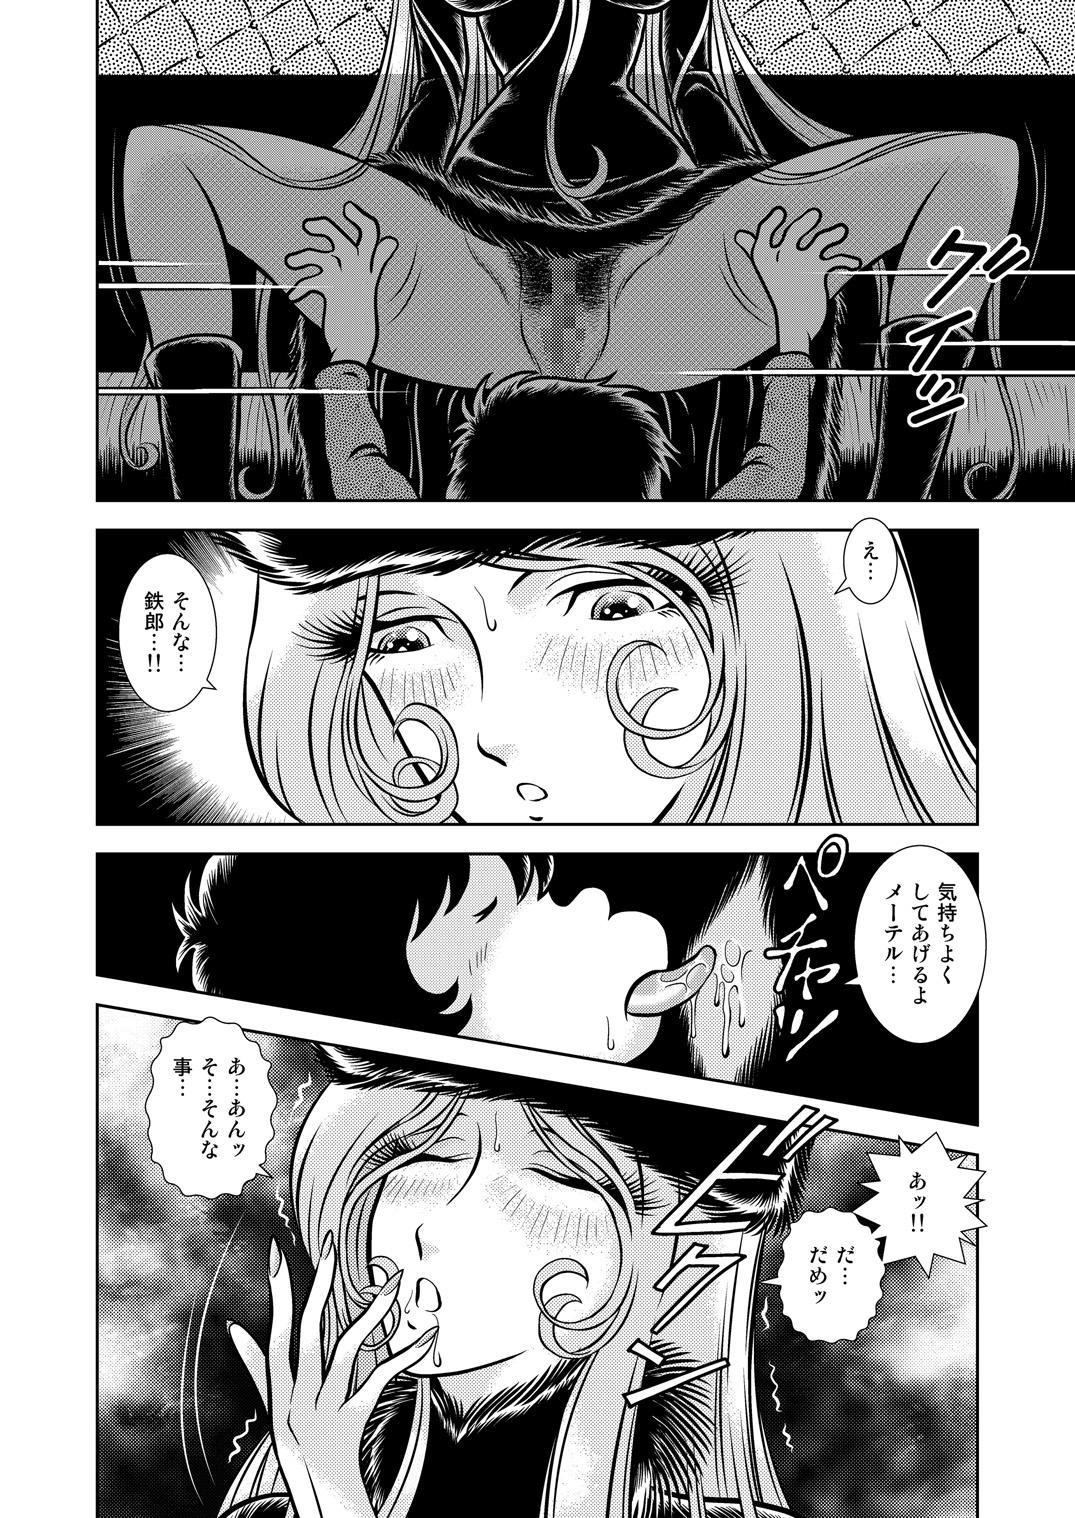 Hardcore Free Porn Maetel Story 11 - Galaxy express 999 French Porn - Page 6